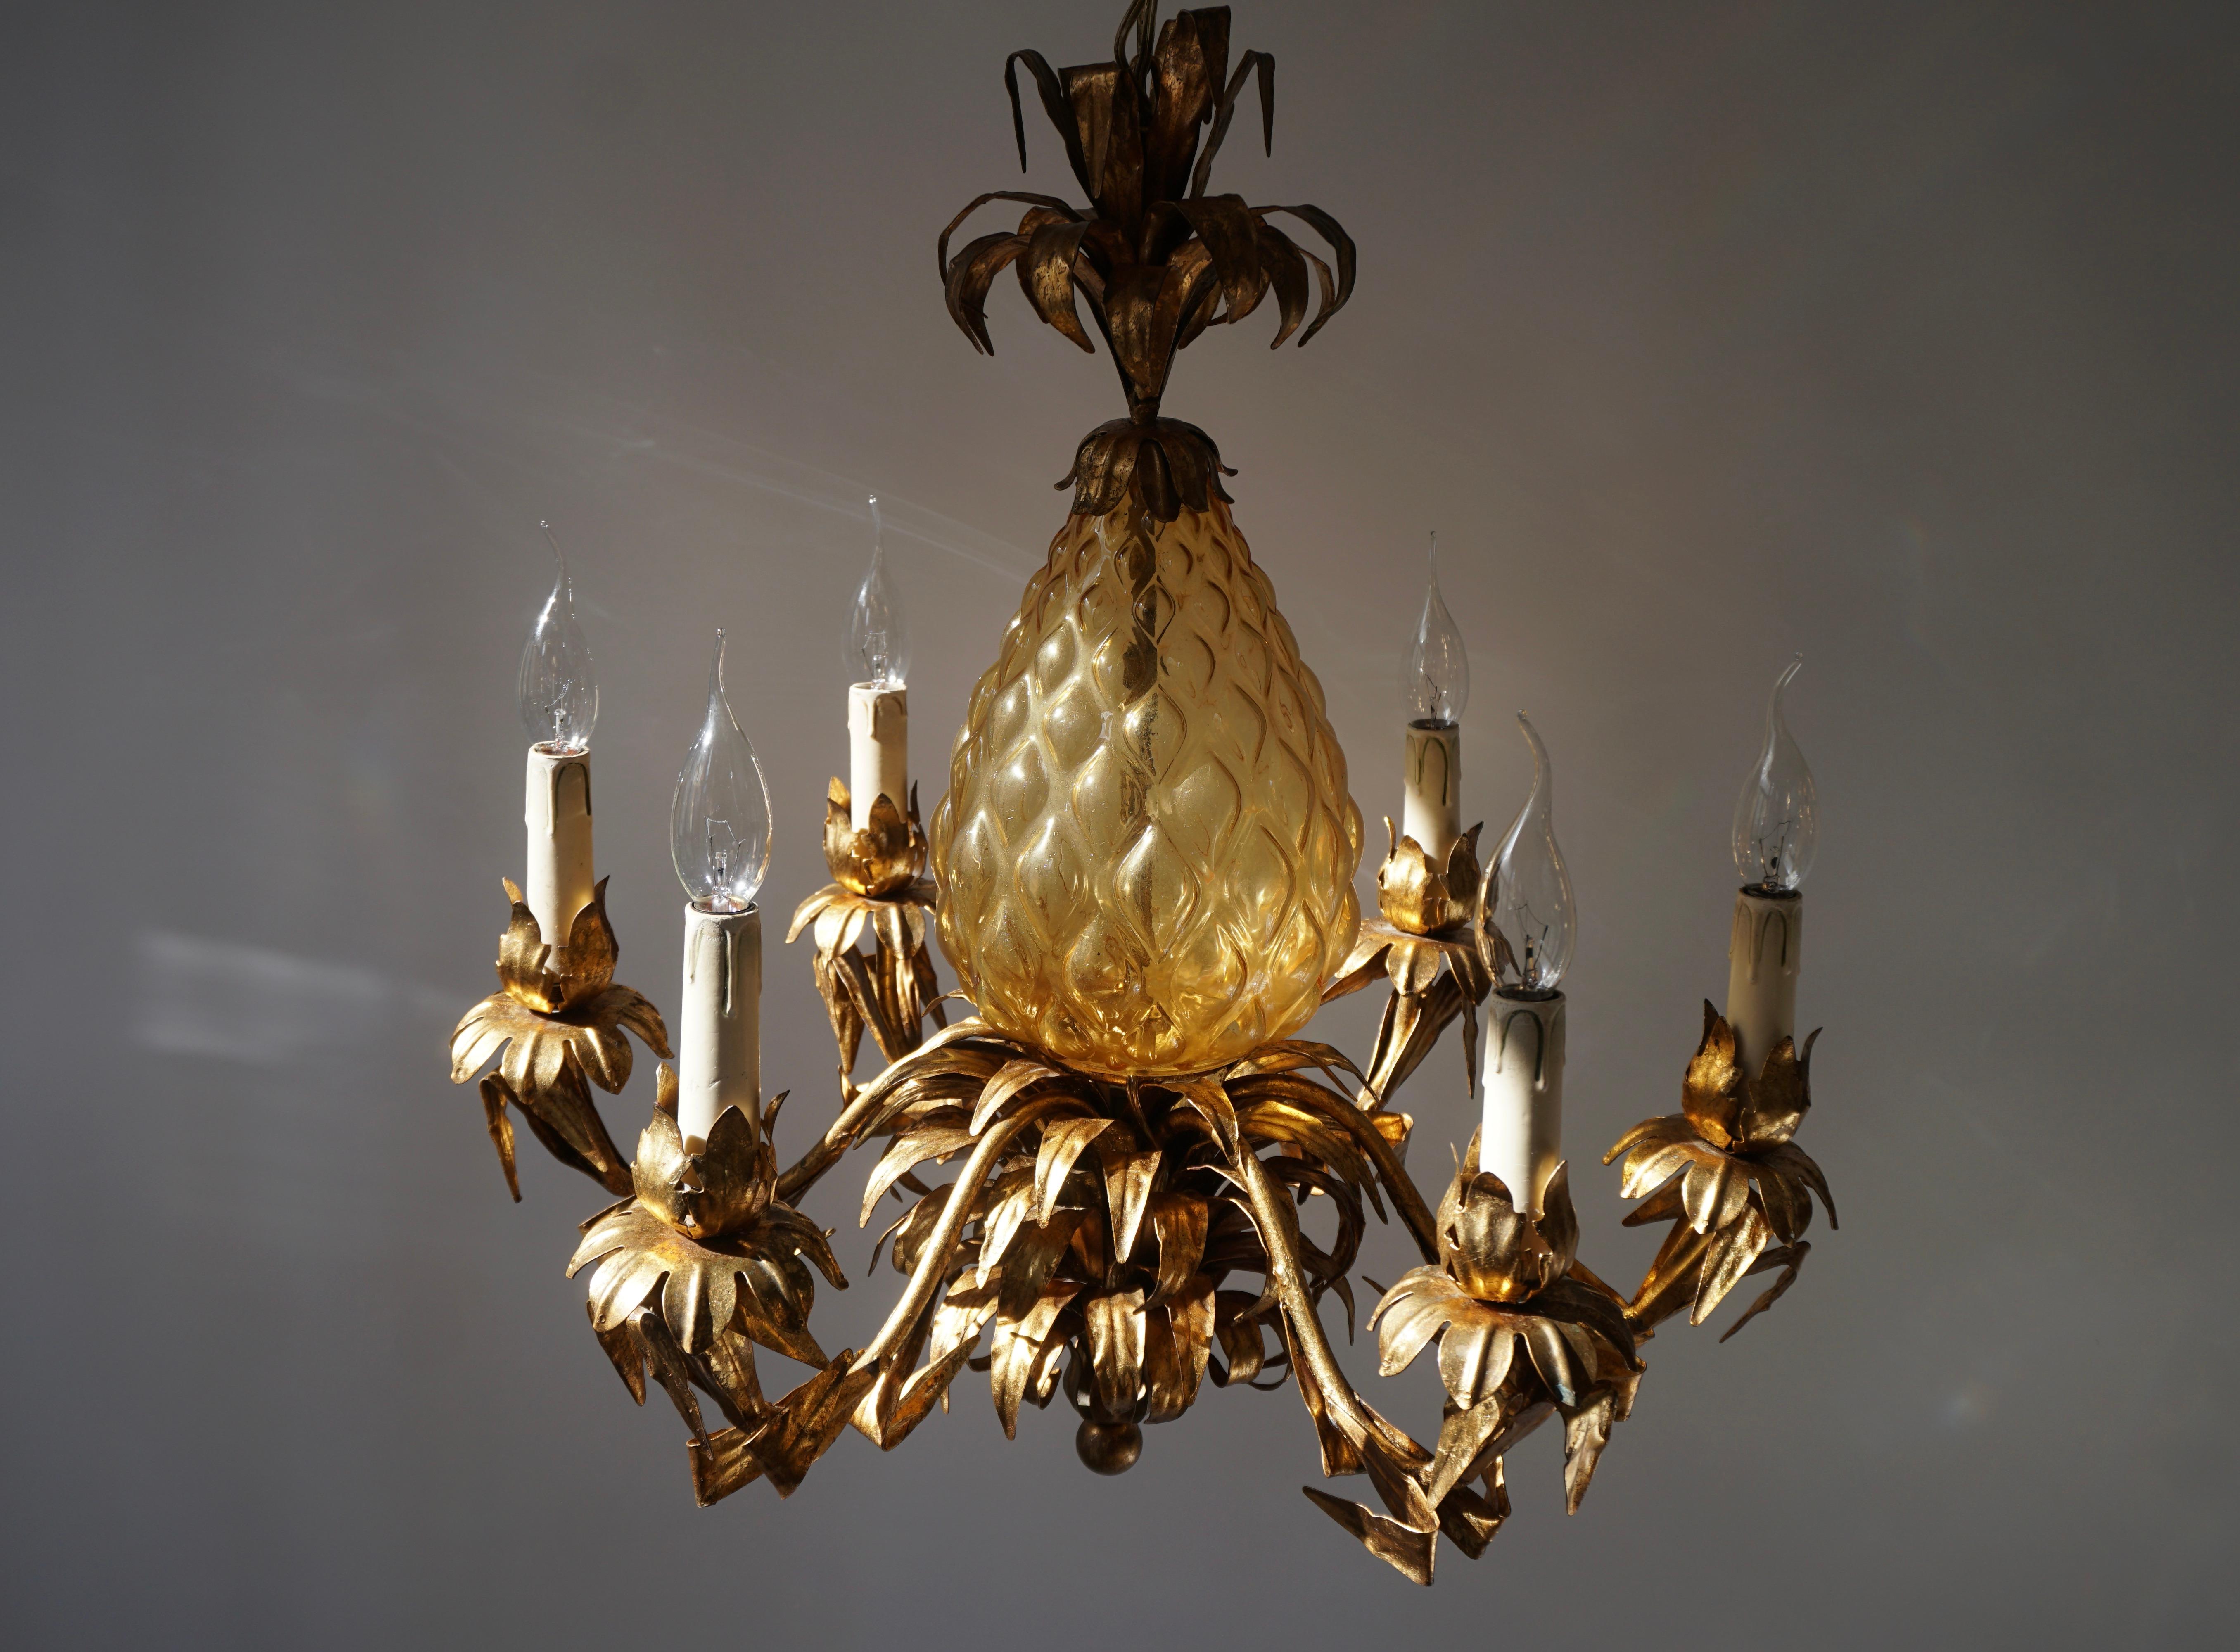 20th Century Midcentury Hollywood Regency Murano Glass Pineapple Chandelier For Sale